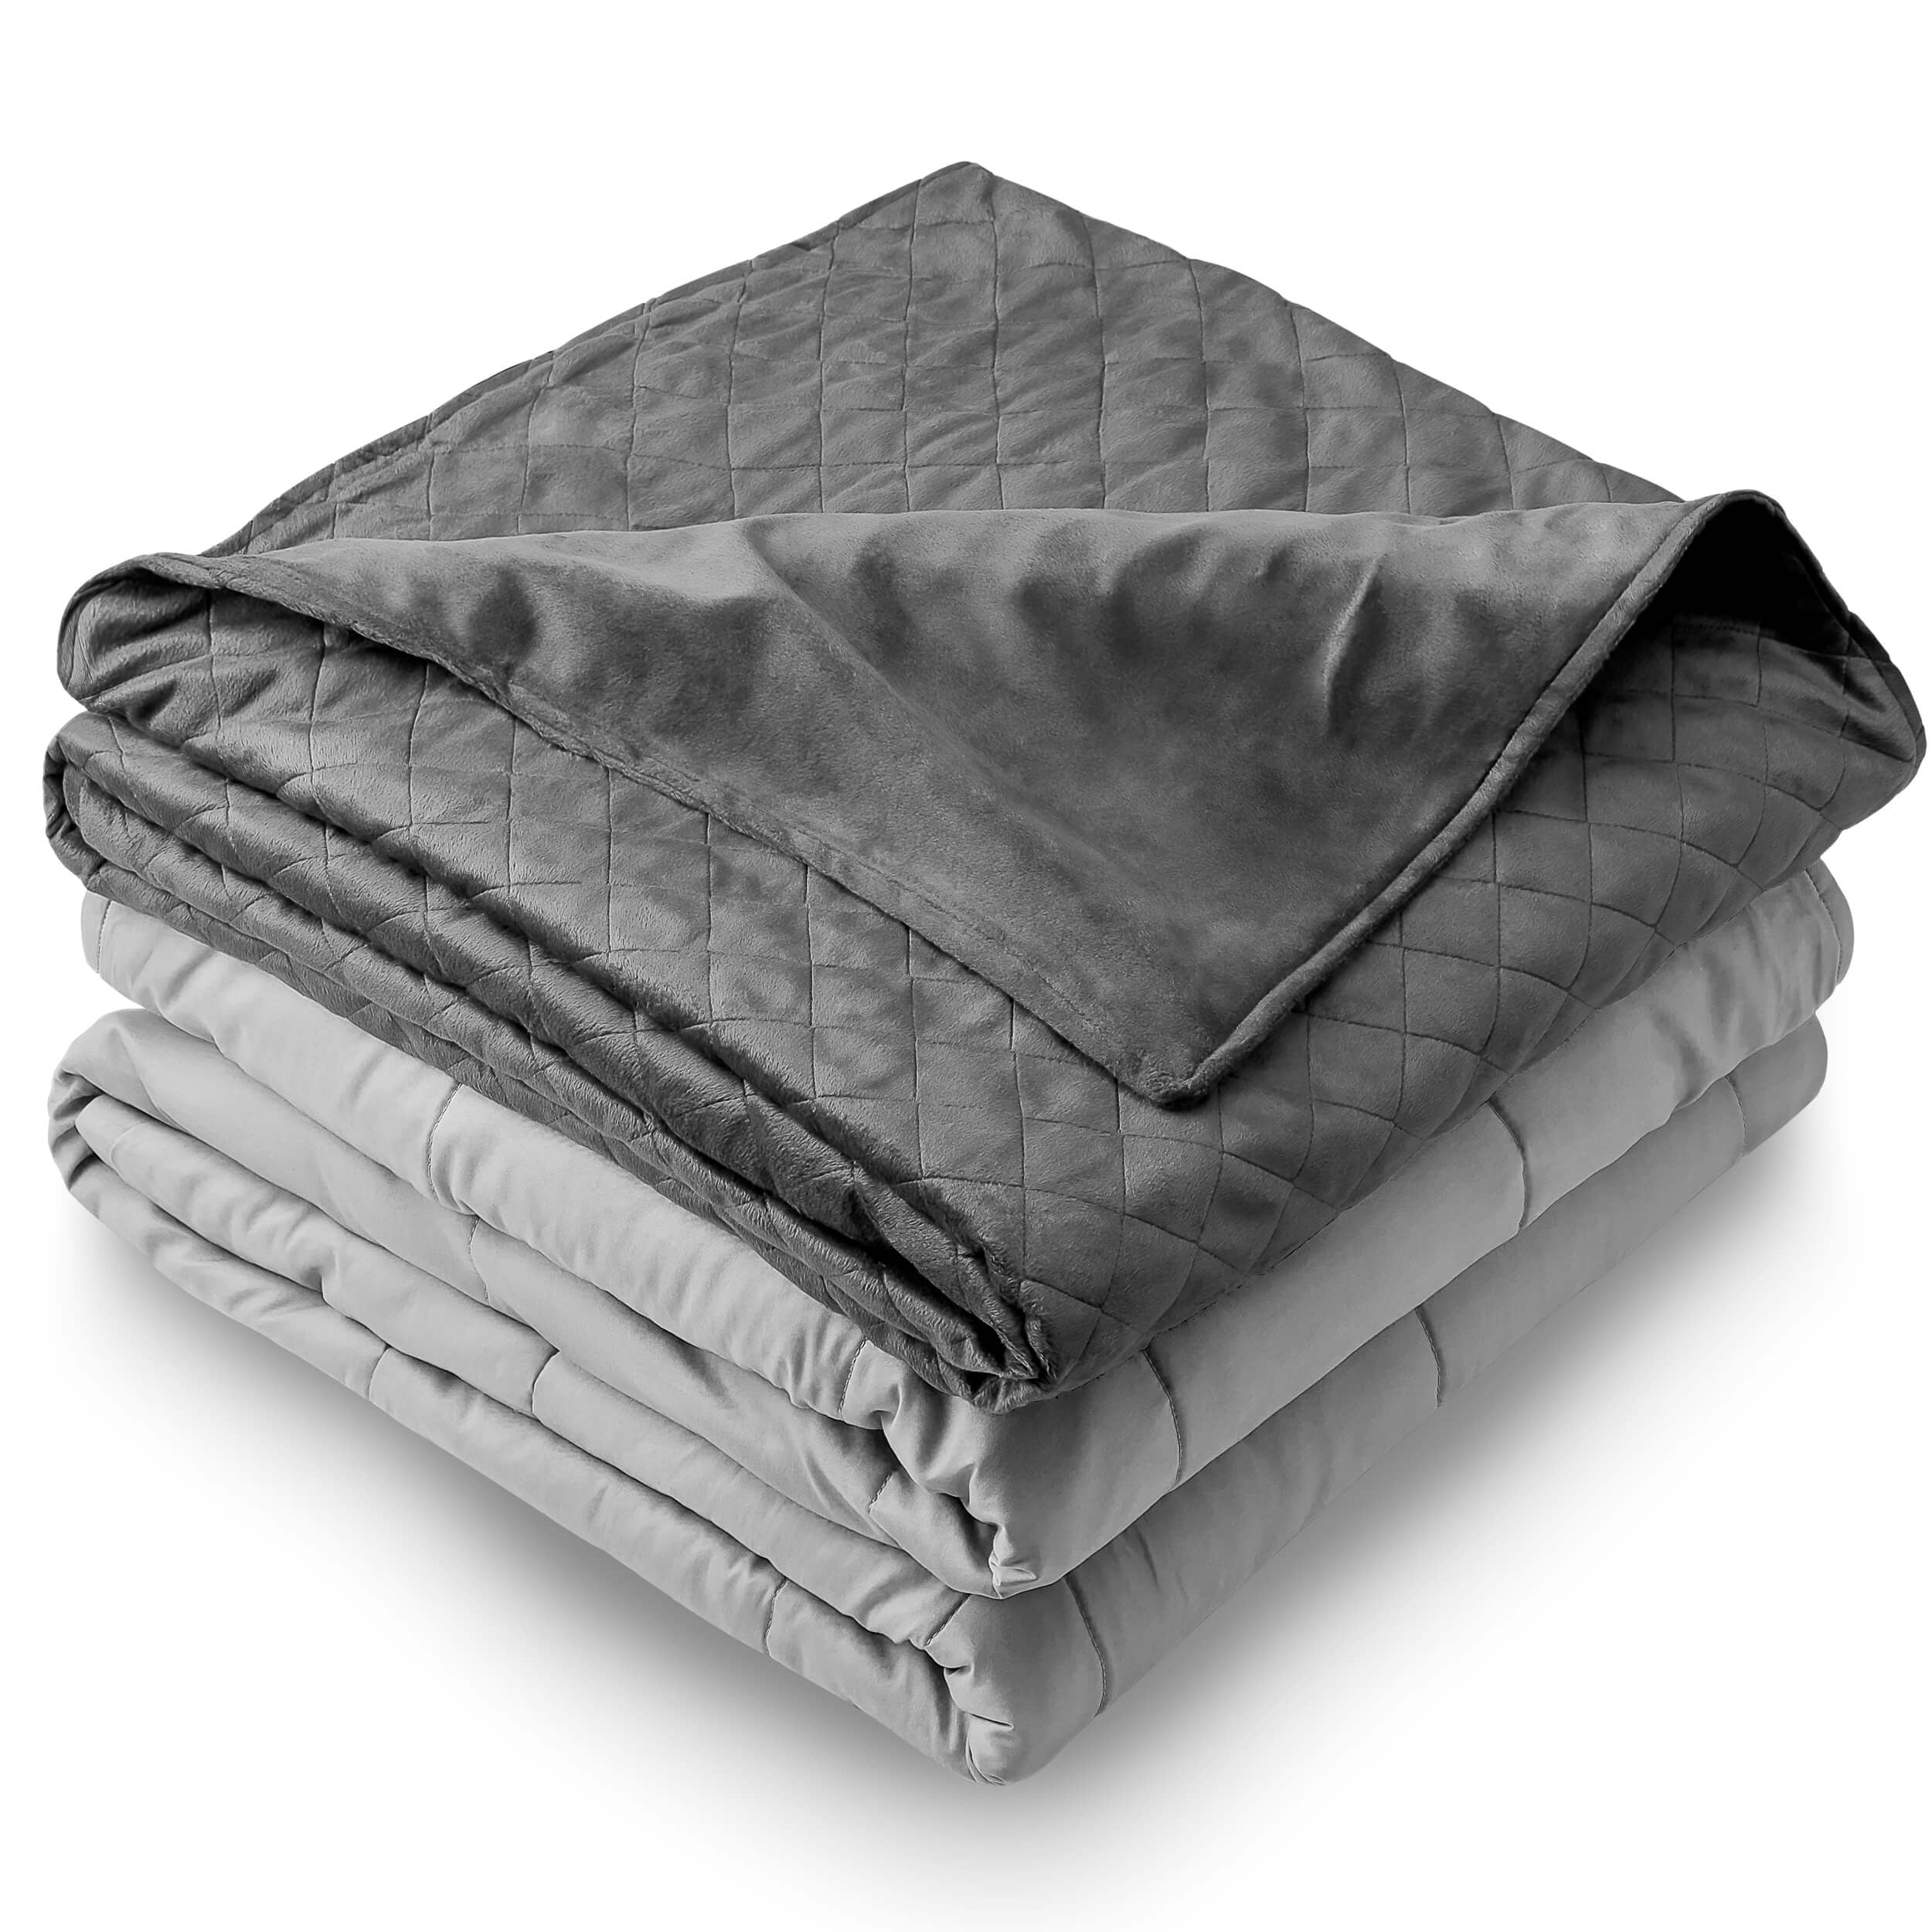 Bare Home Weighted Blanket with Duvet Cover (60"x80", 17lb, Grey / Grey